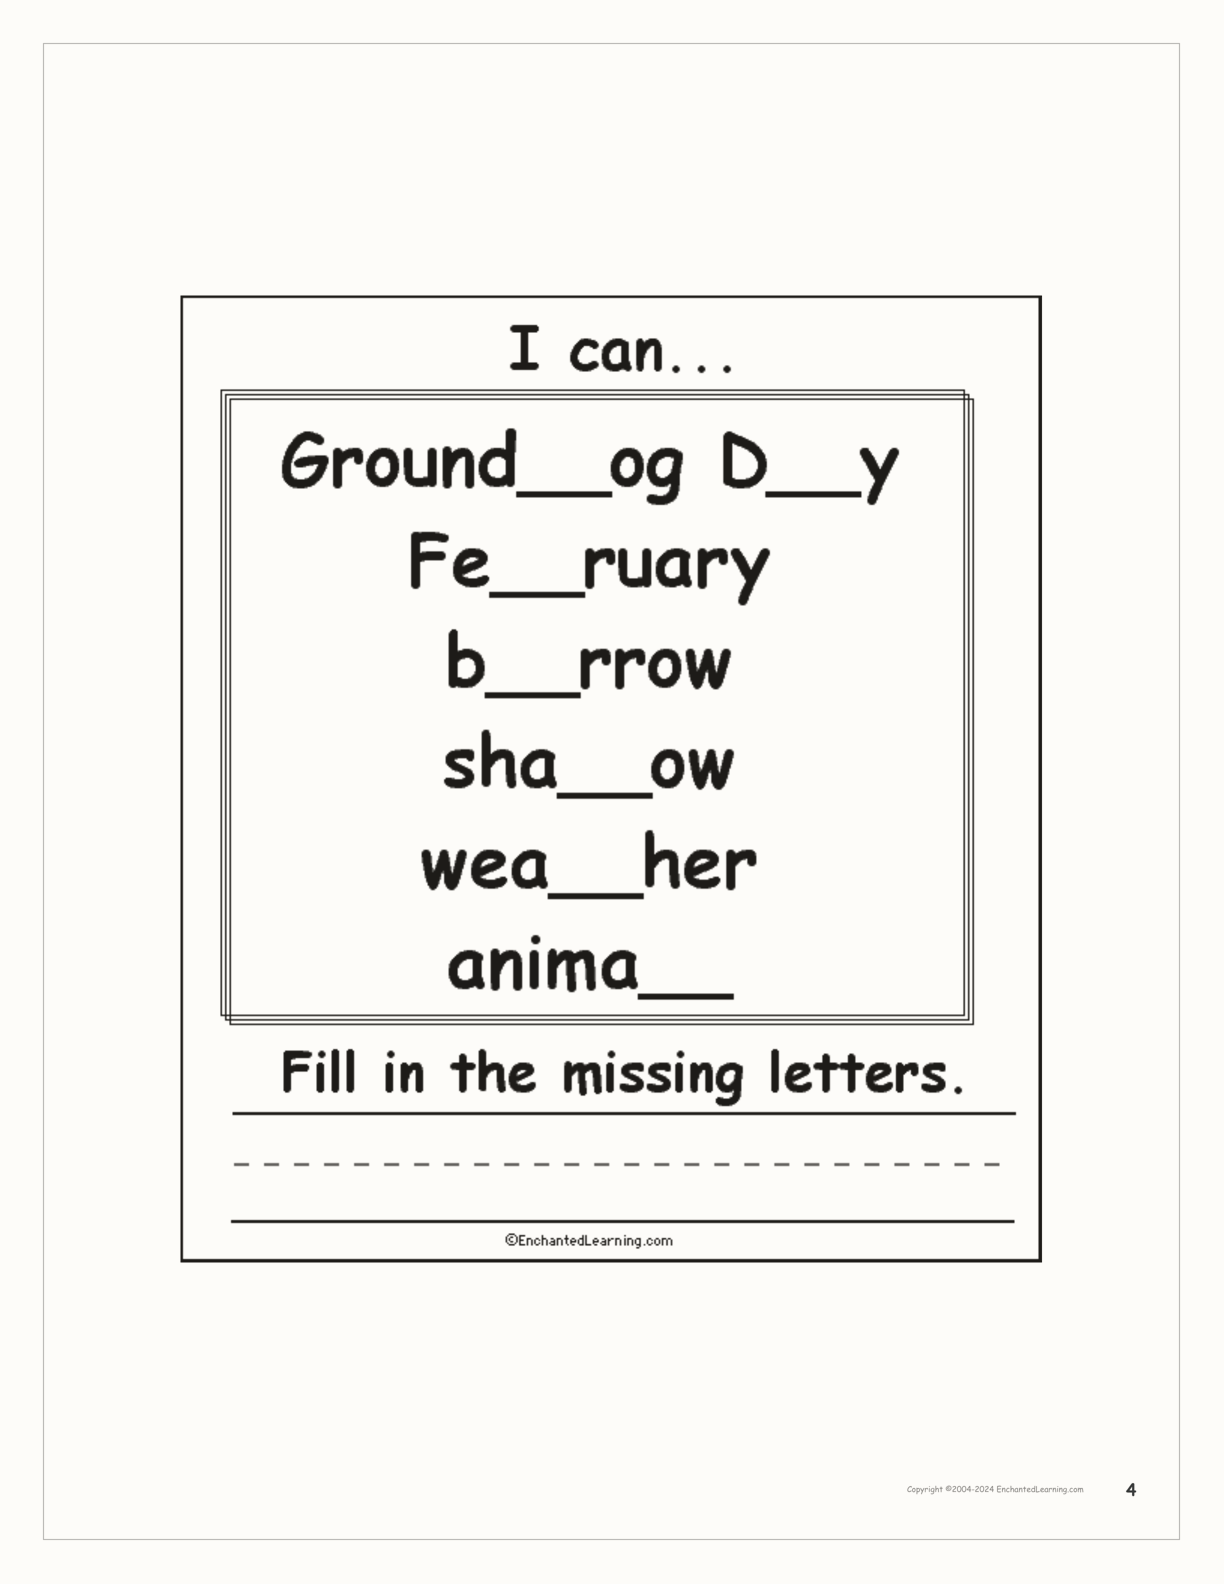 Groundhog Day 'I Can' Book interactive worksheet page 4